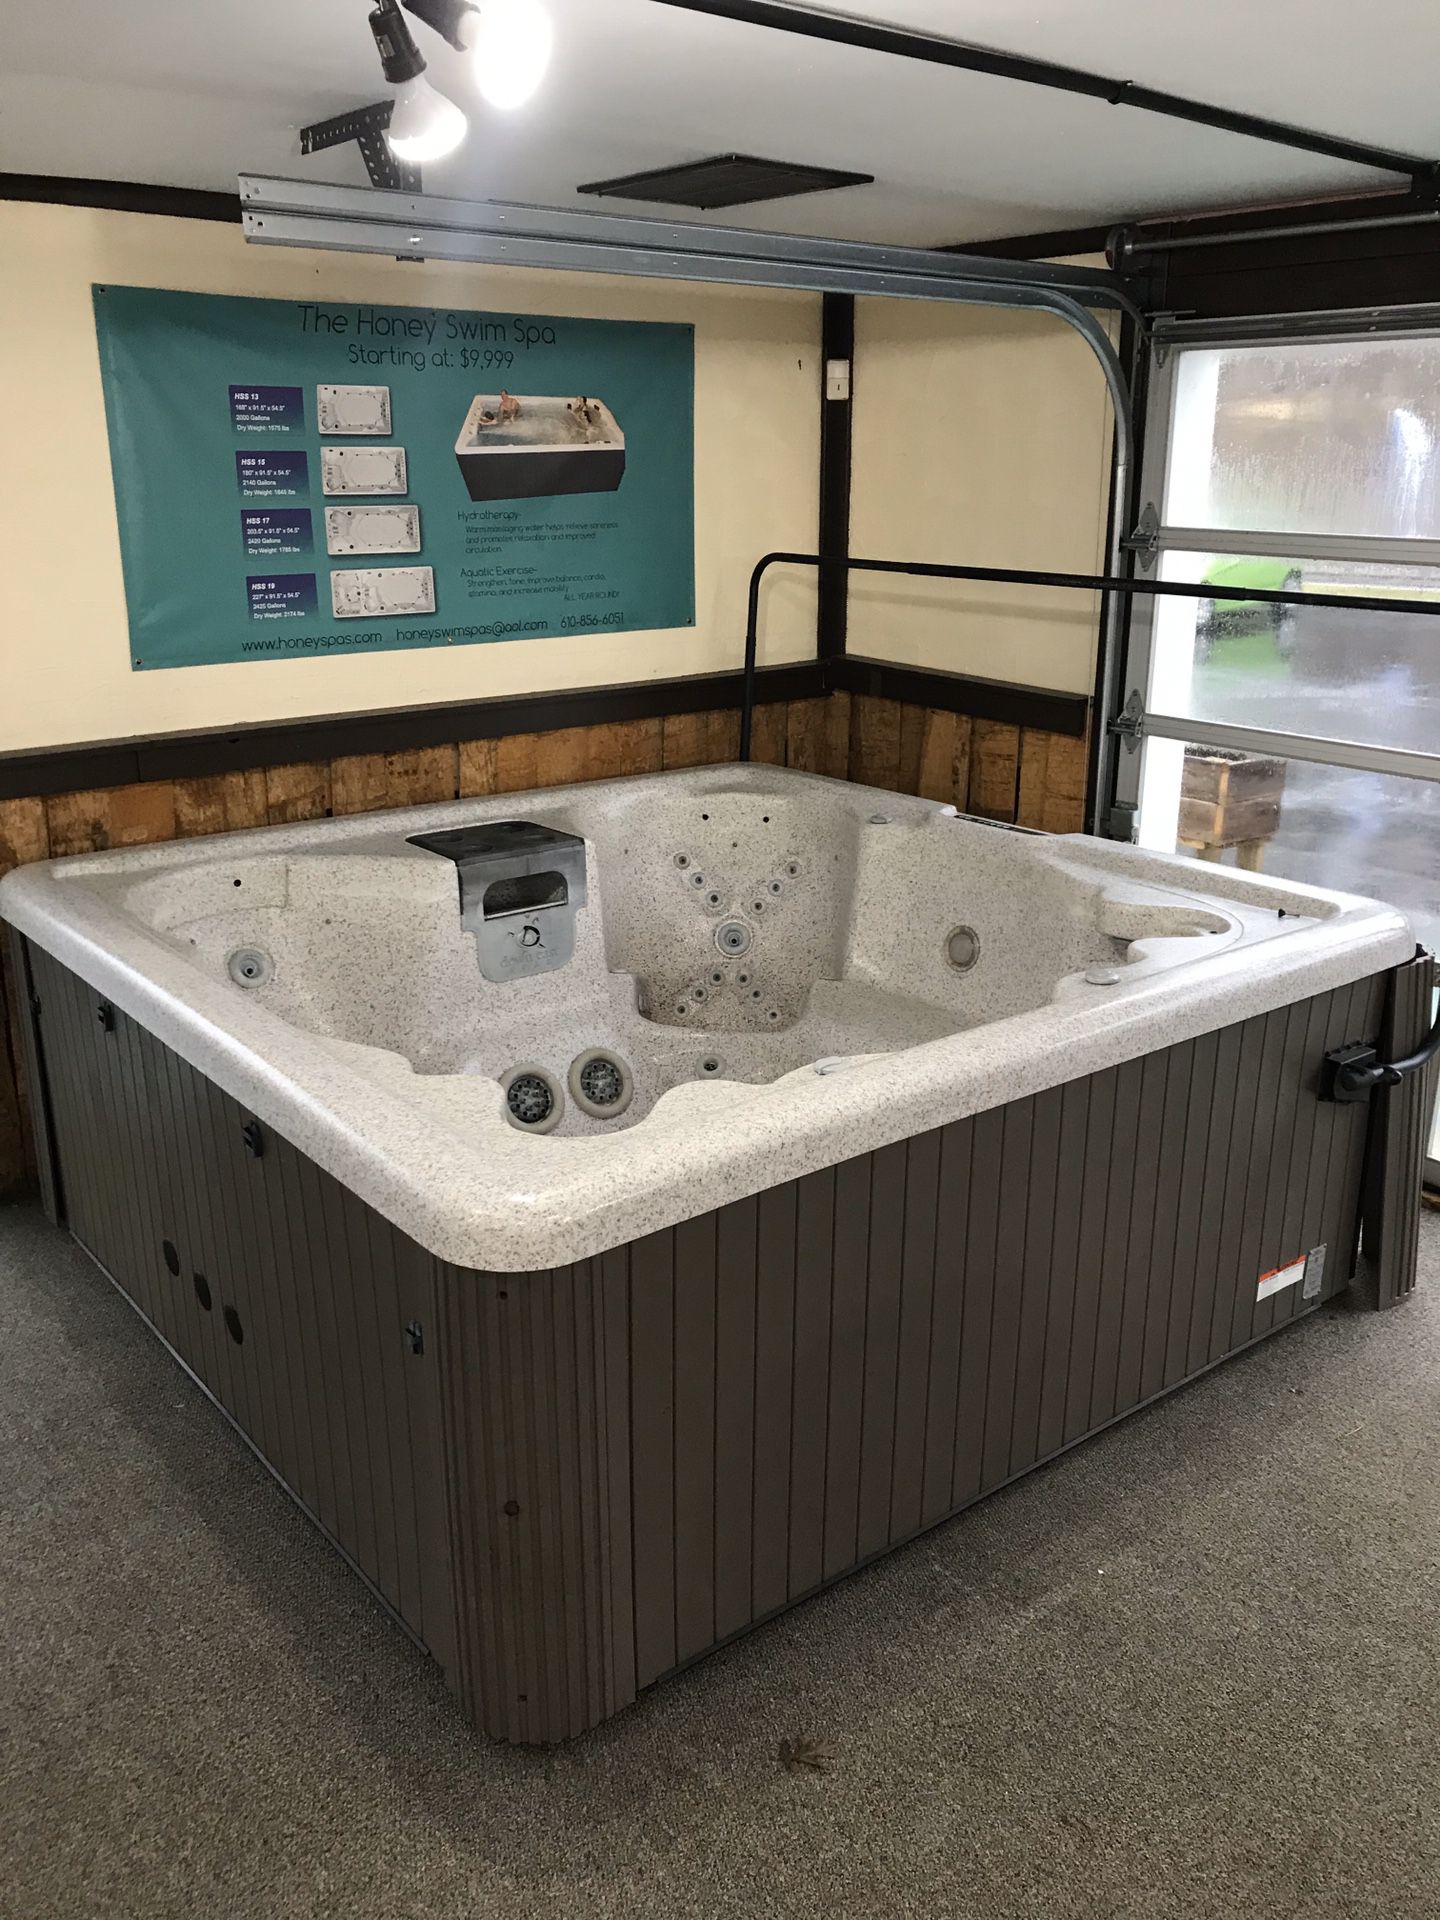 Reconditioned large hot tub